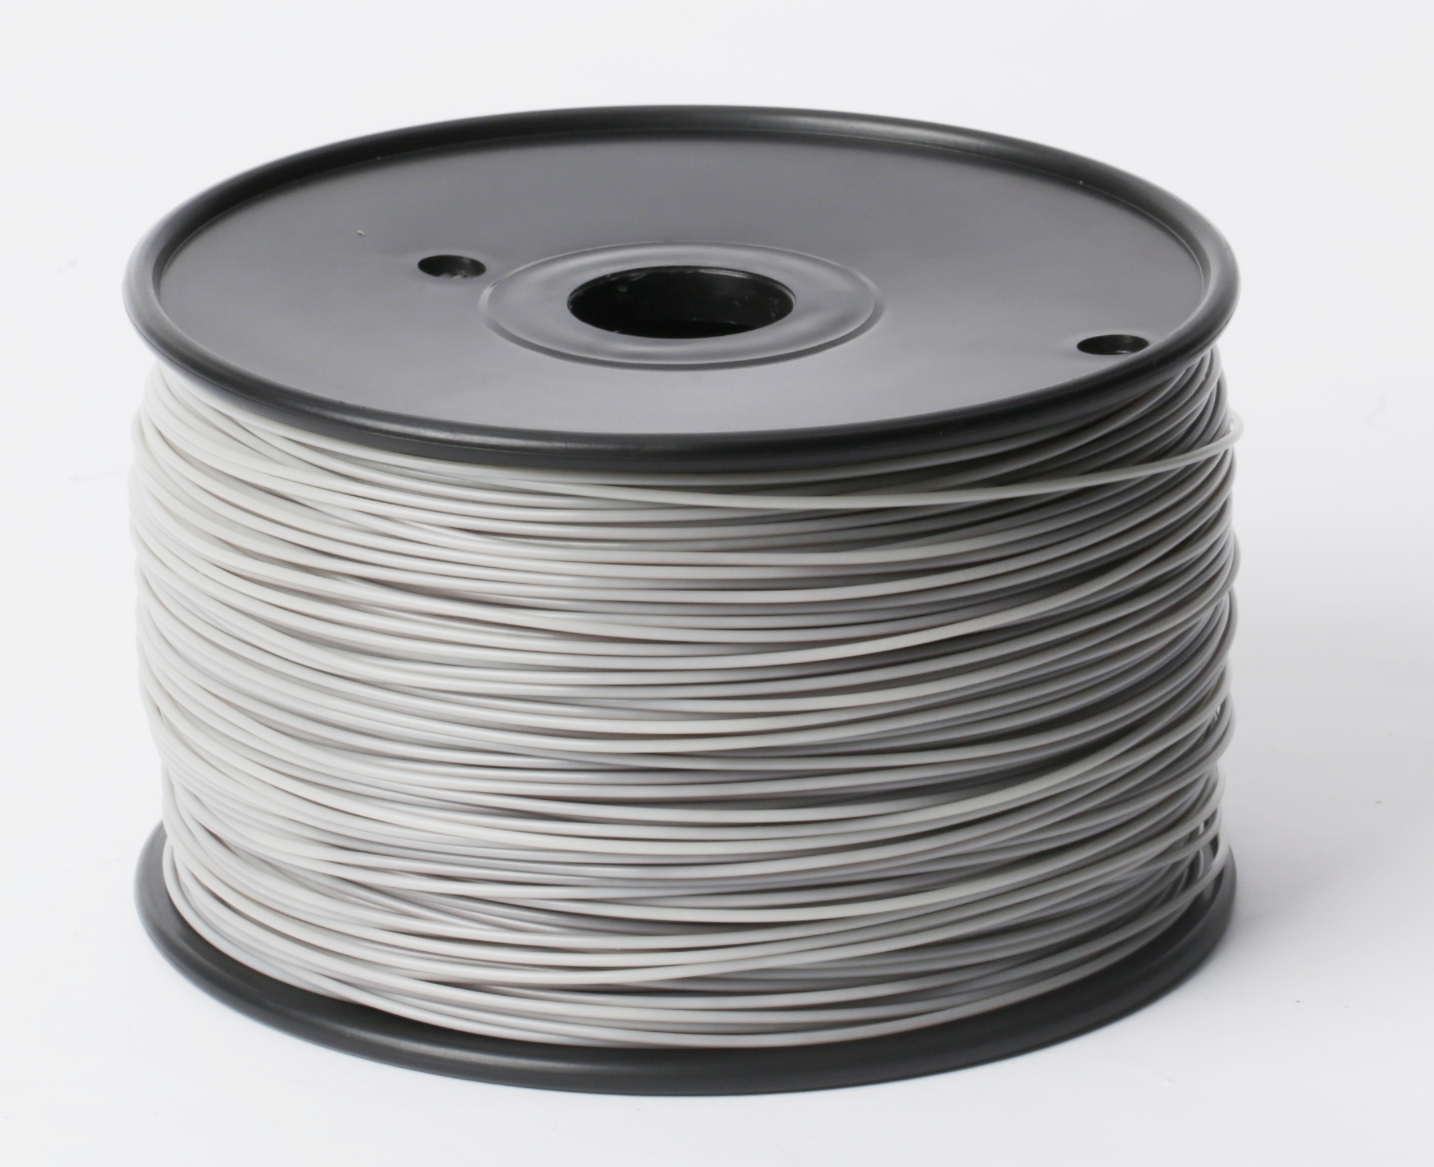 ABS Gray filament 1.75mm 1kg/spool for 3D Printer